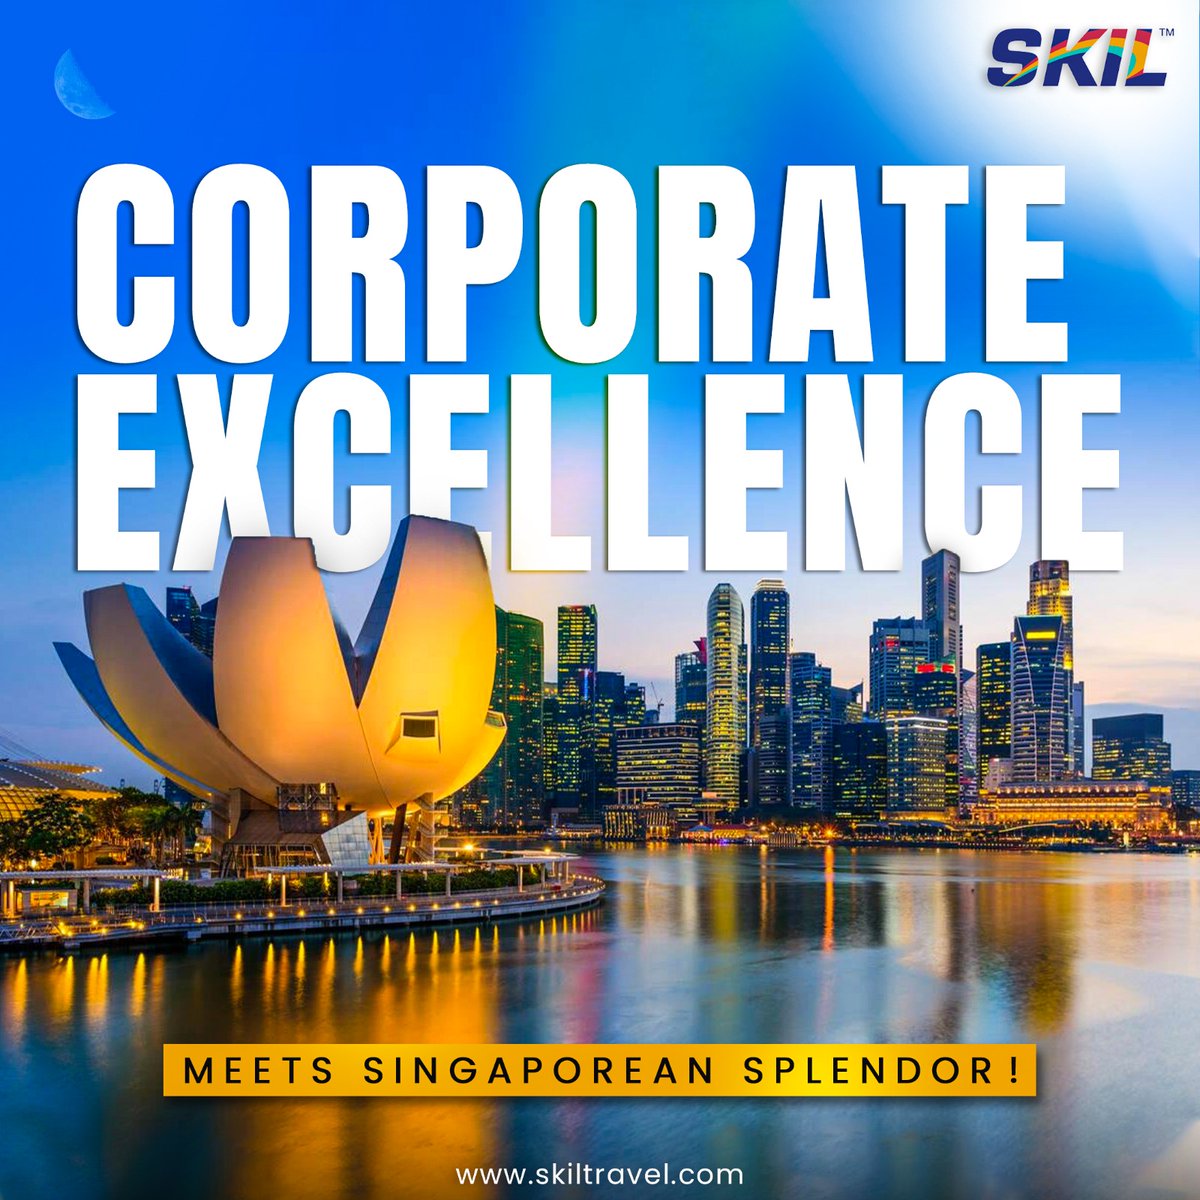 Elevate your corporate travel in Singapore. We combine professionalism with vibrant experiences, from retreats to conferences. Bespoke solutions for lasting impressions. #SKILTravel #Singapore #CorporateTravel #CorporateEvents #BusinessTrips